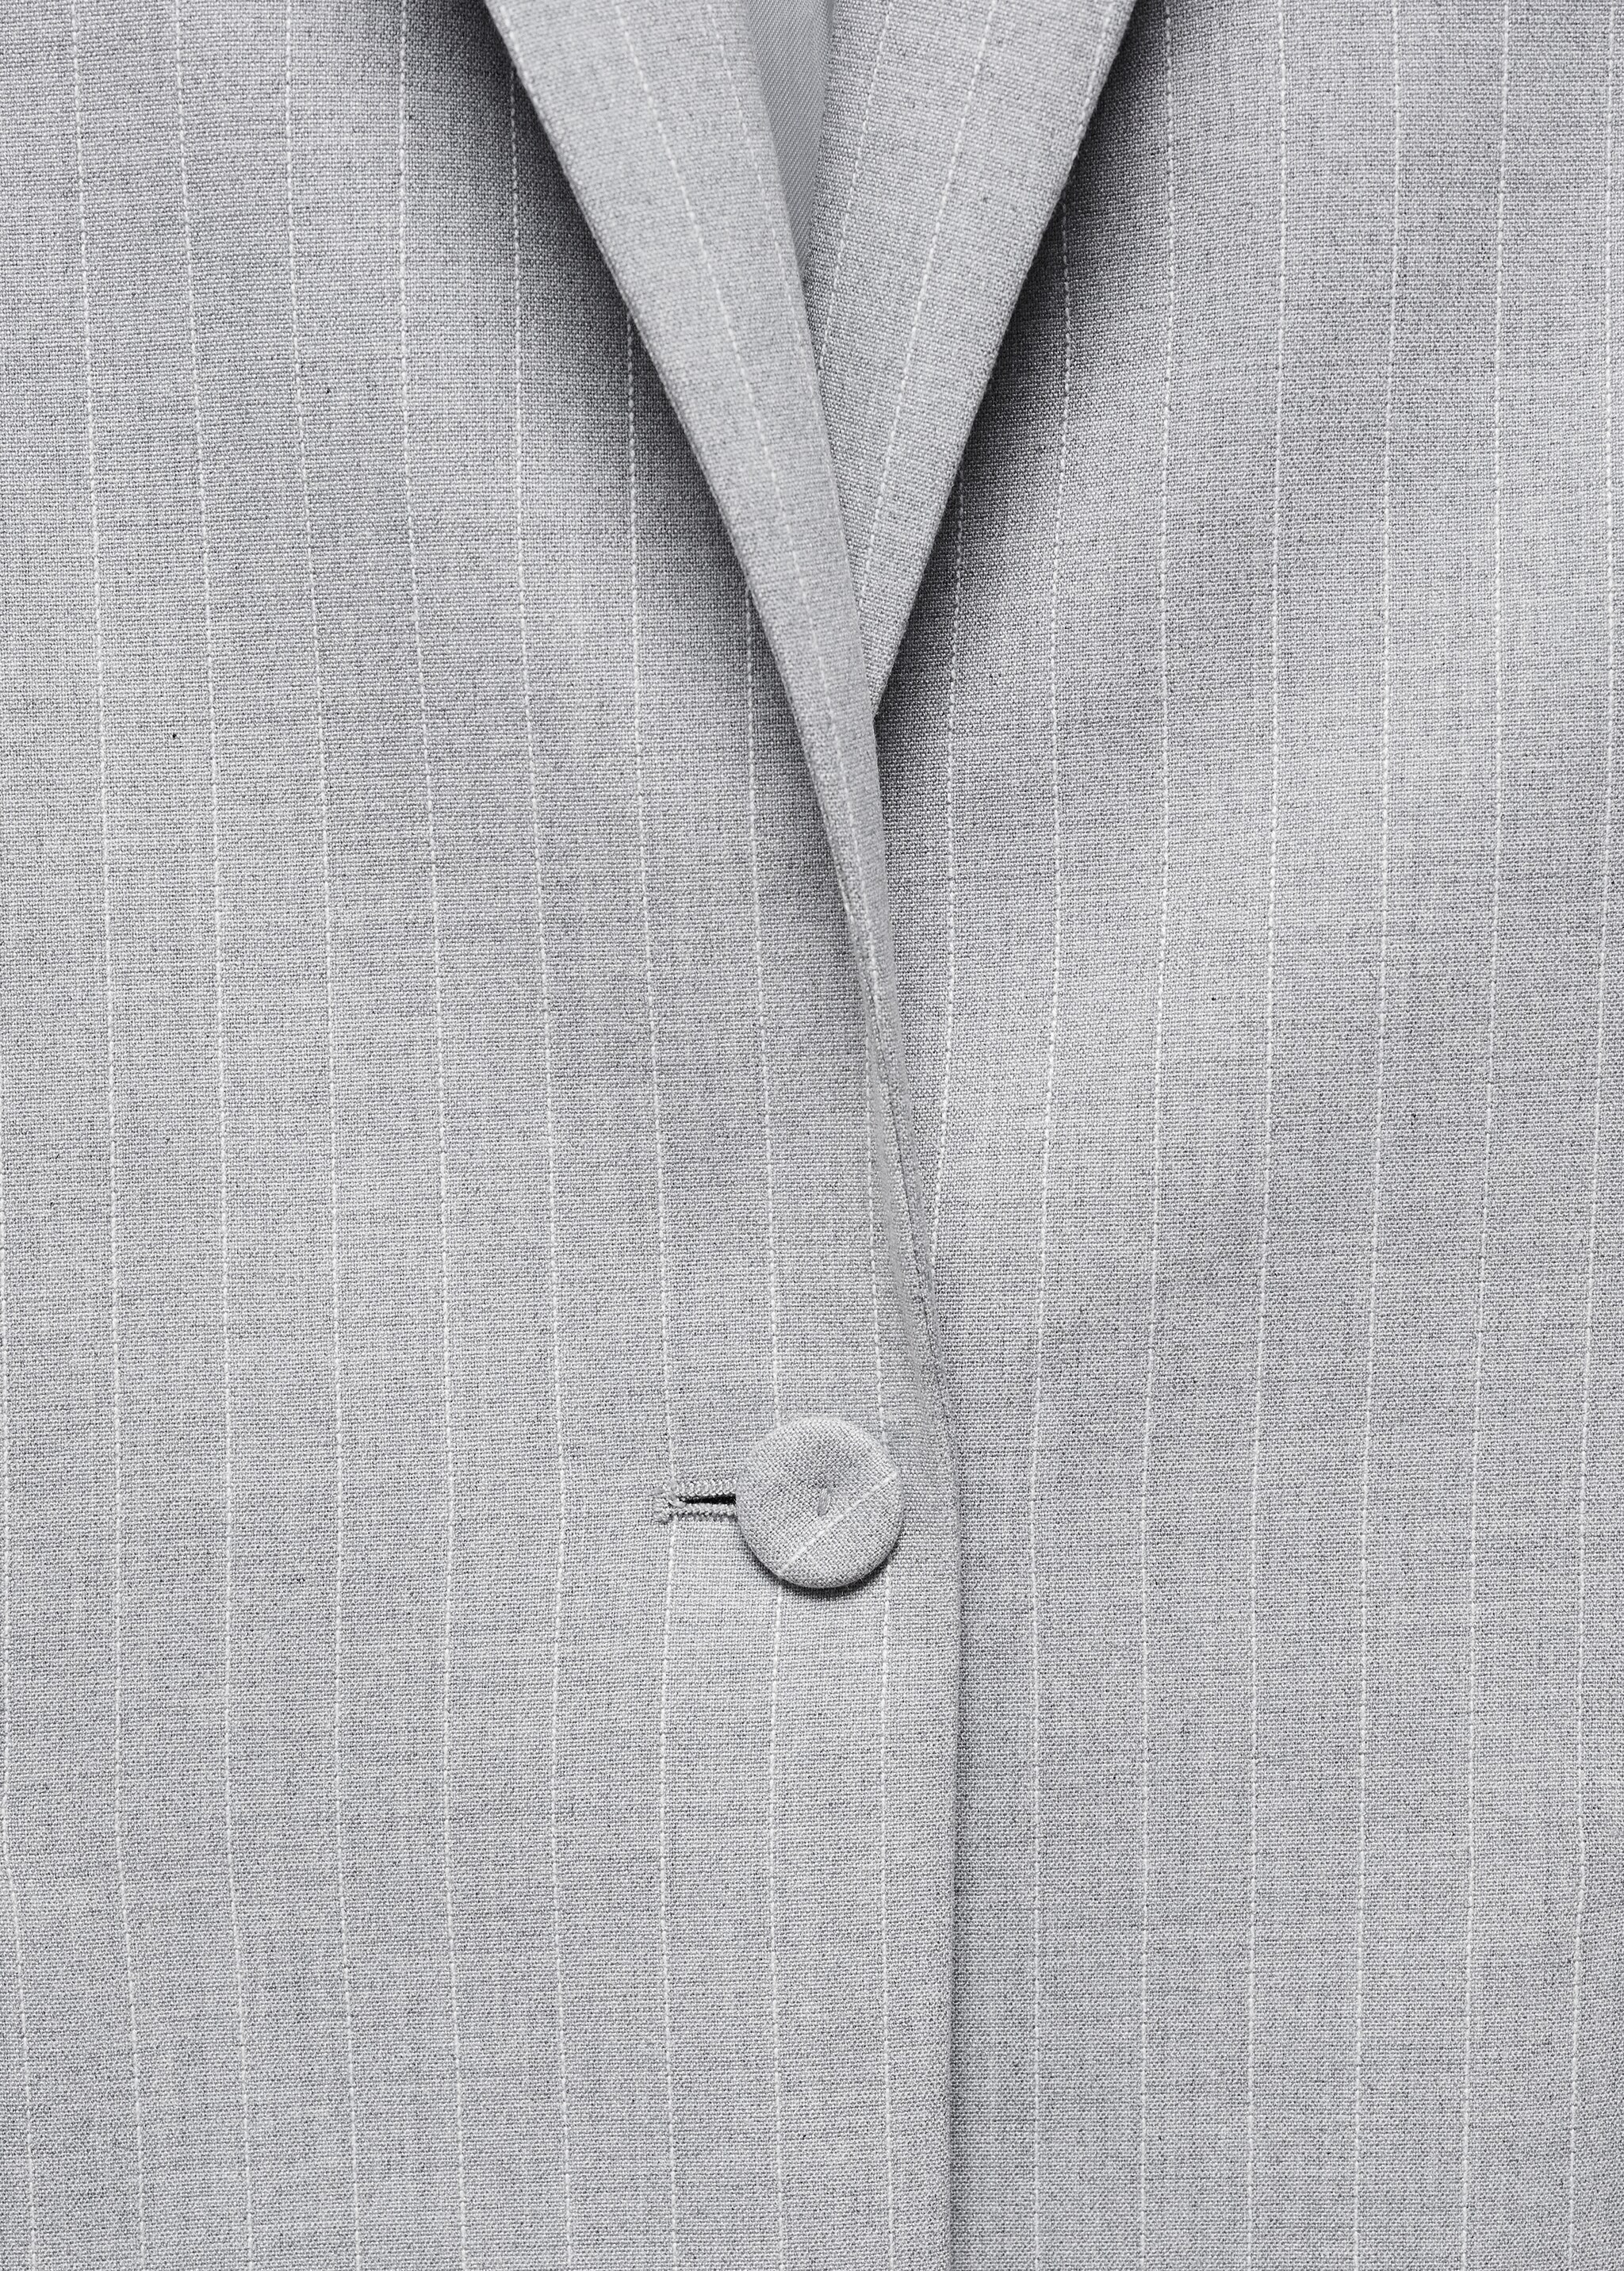 Pinstripe suit blazer - Details of the article 8